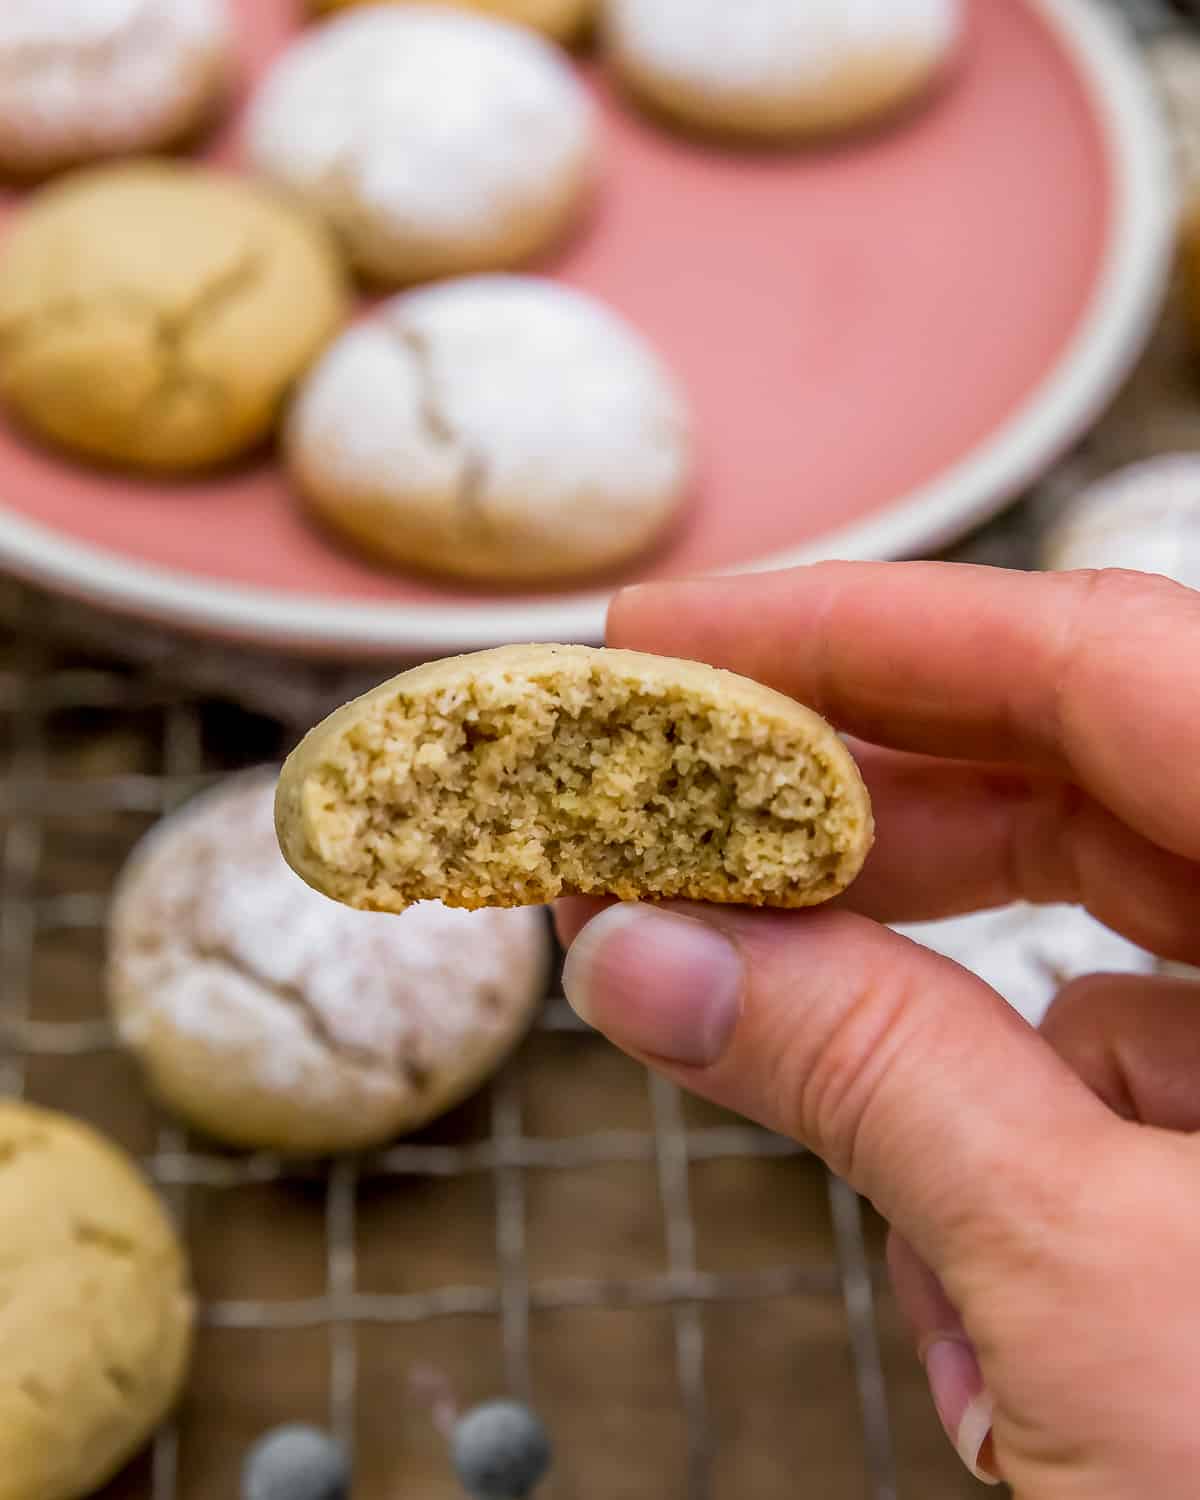 Holding a Soft Ginger Crinkle Cookie